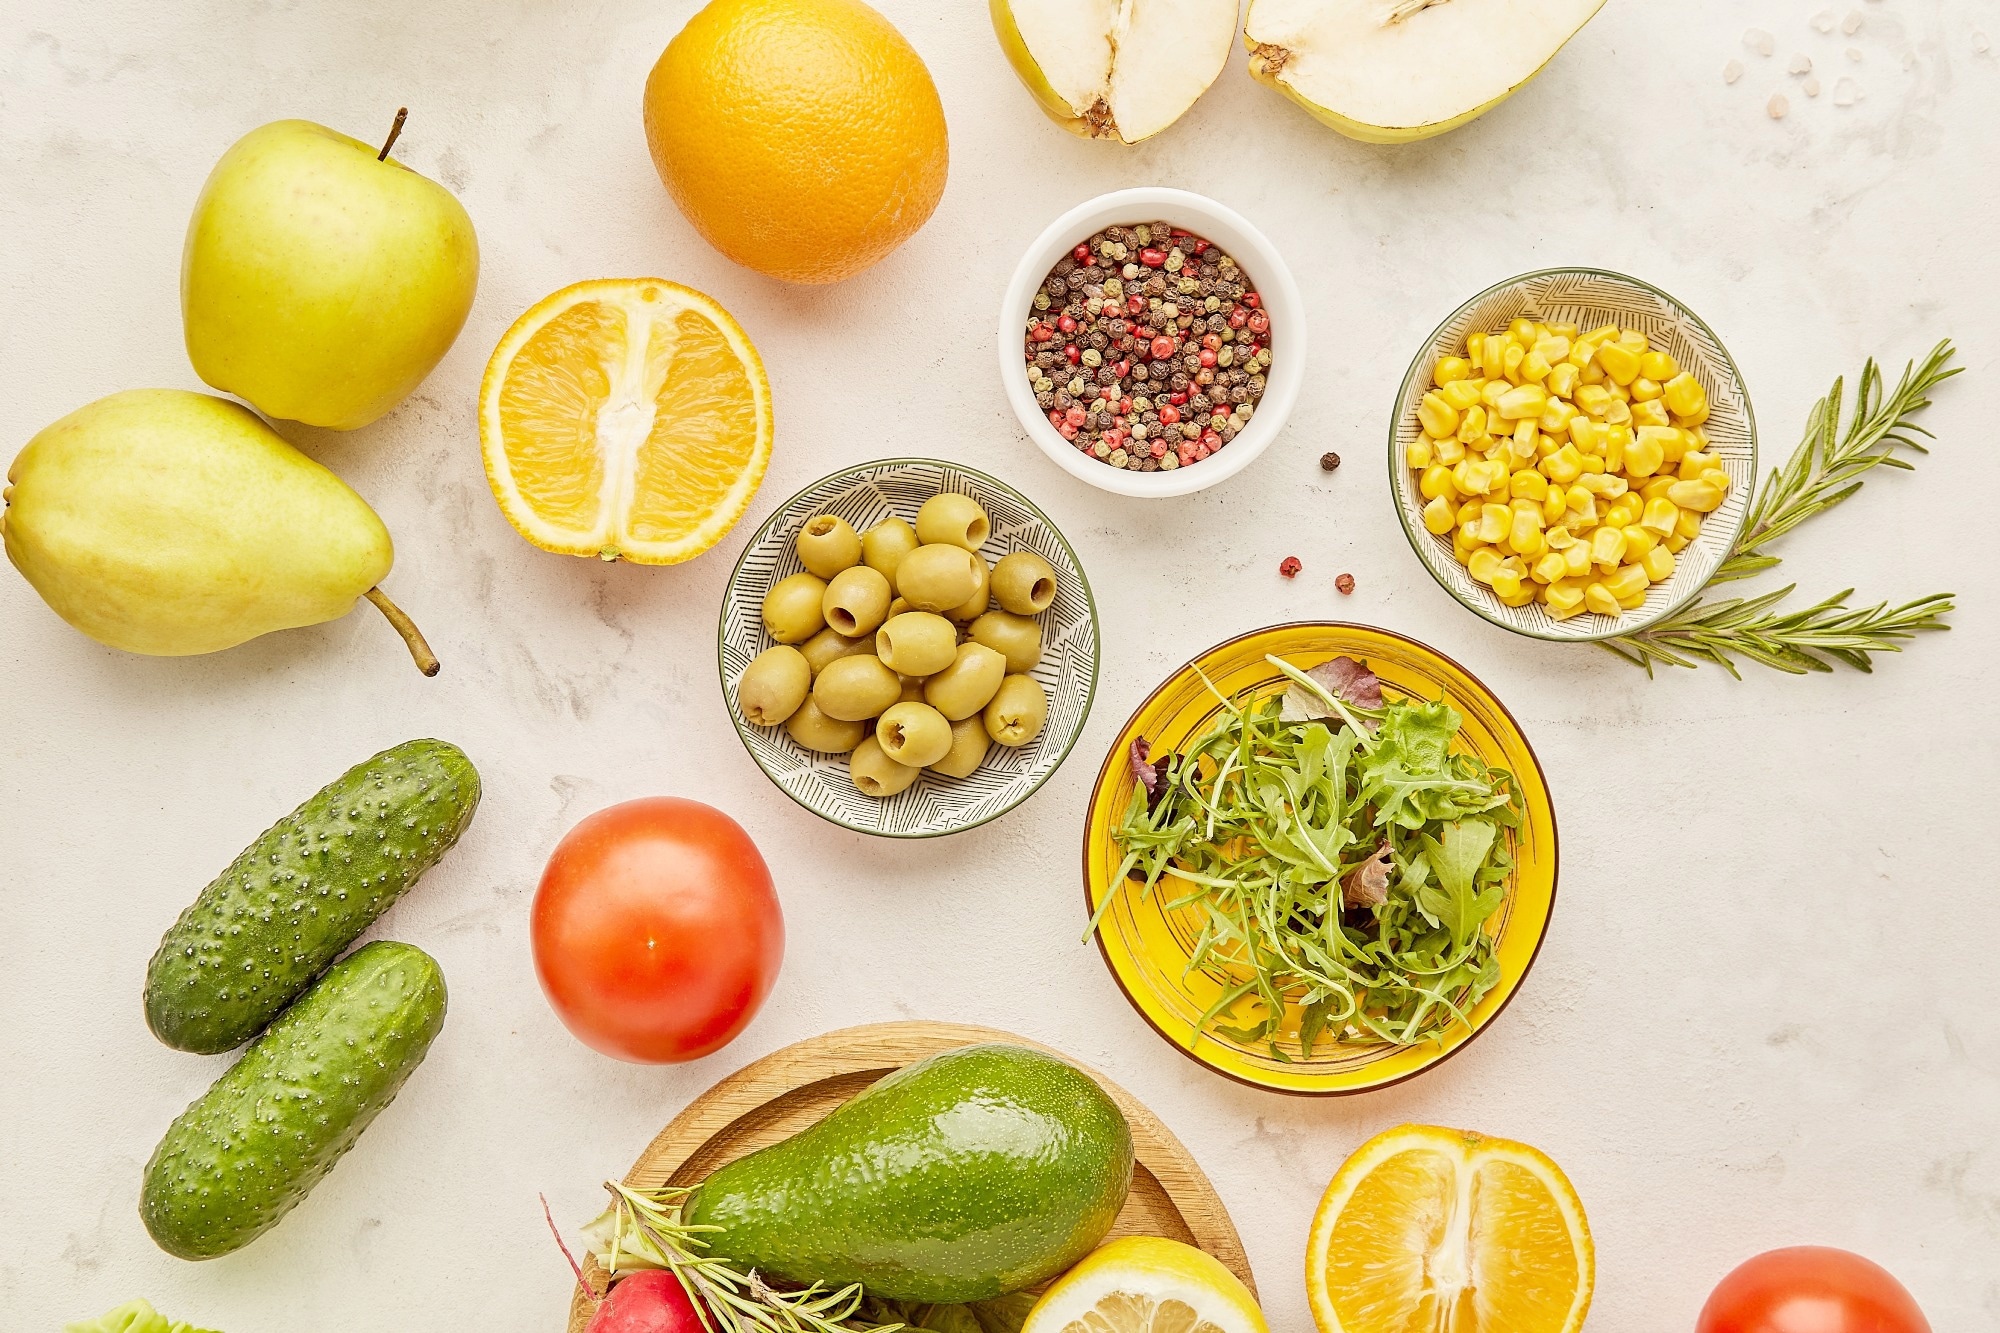 Study: Vegetarian and plant-based diets associated with lower incidence of COVID-19. Image Credit: Alkema Natalia / Shutterstock